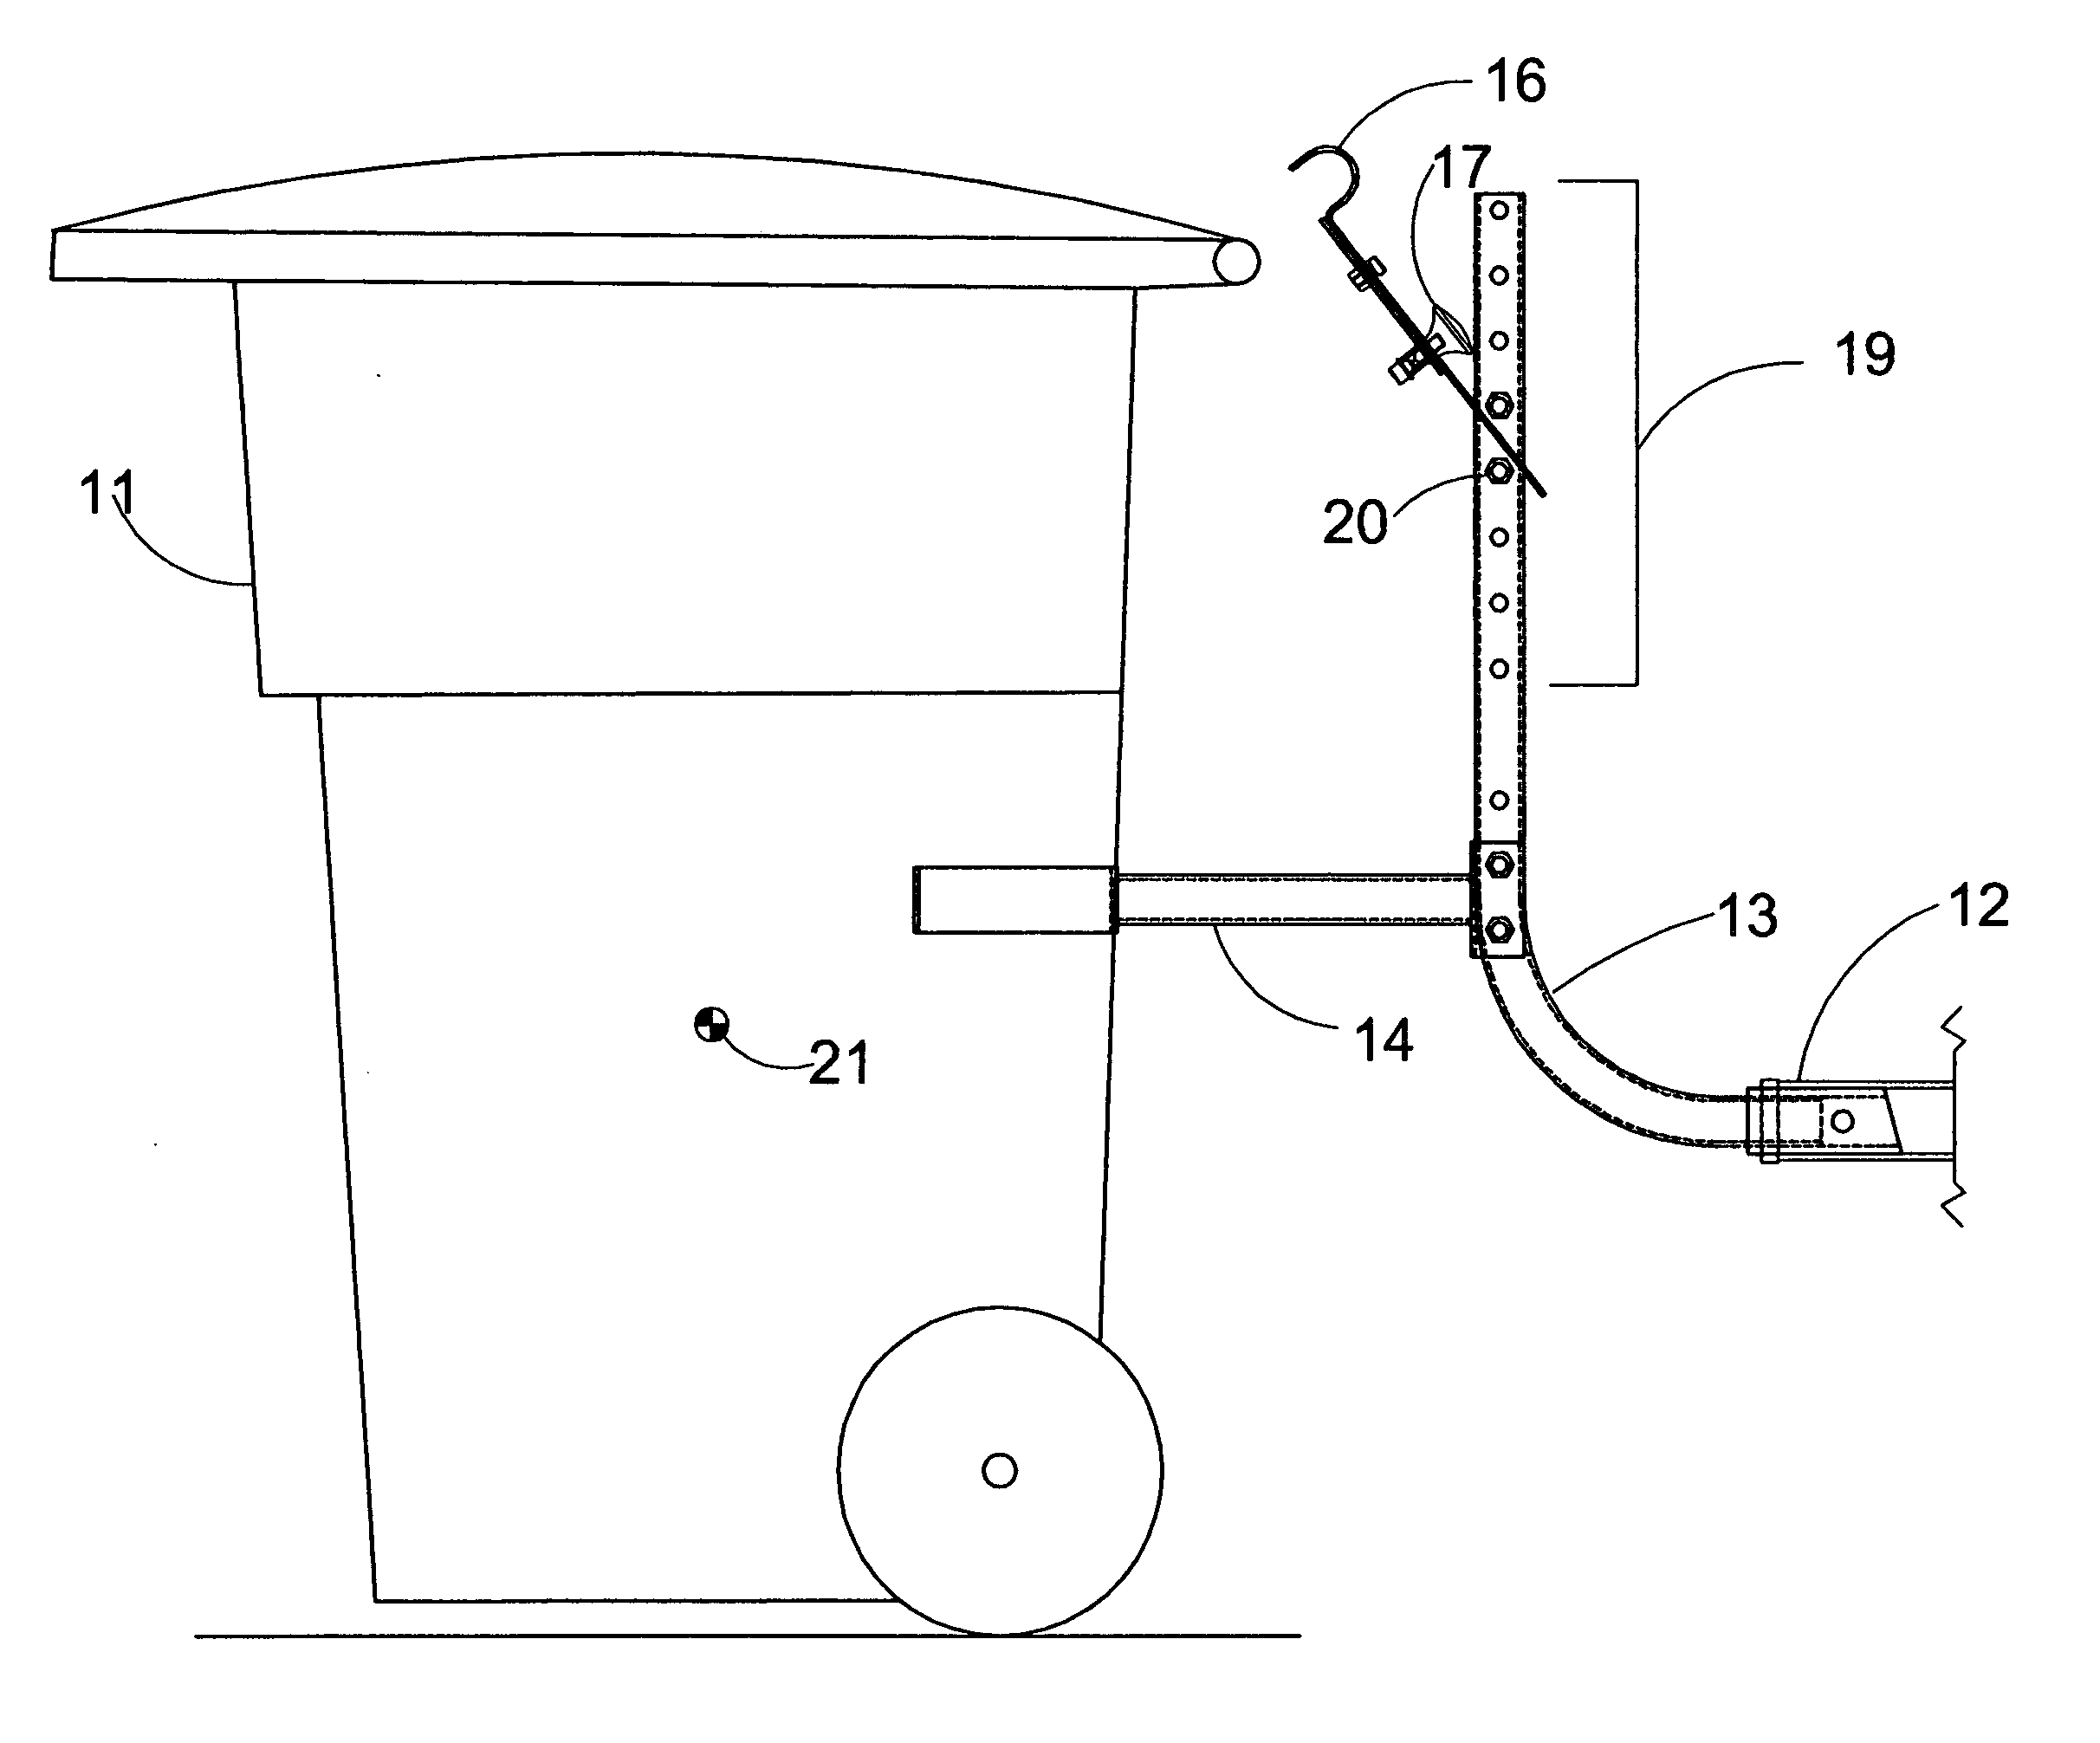 Transport assistance device for large, wheeled refuse containers